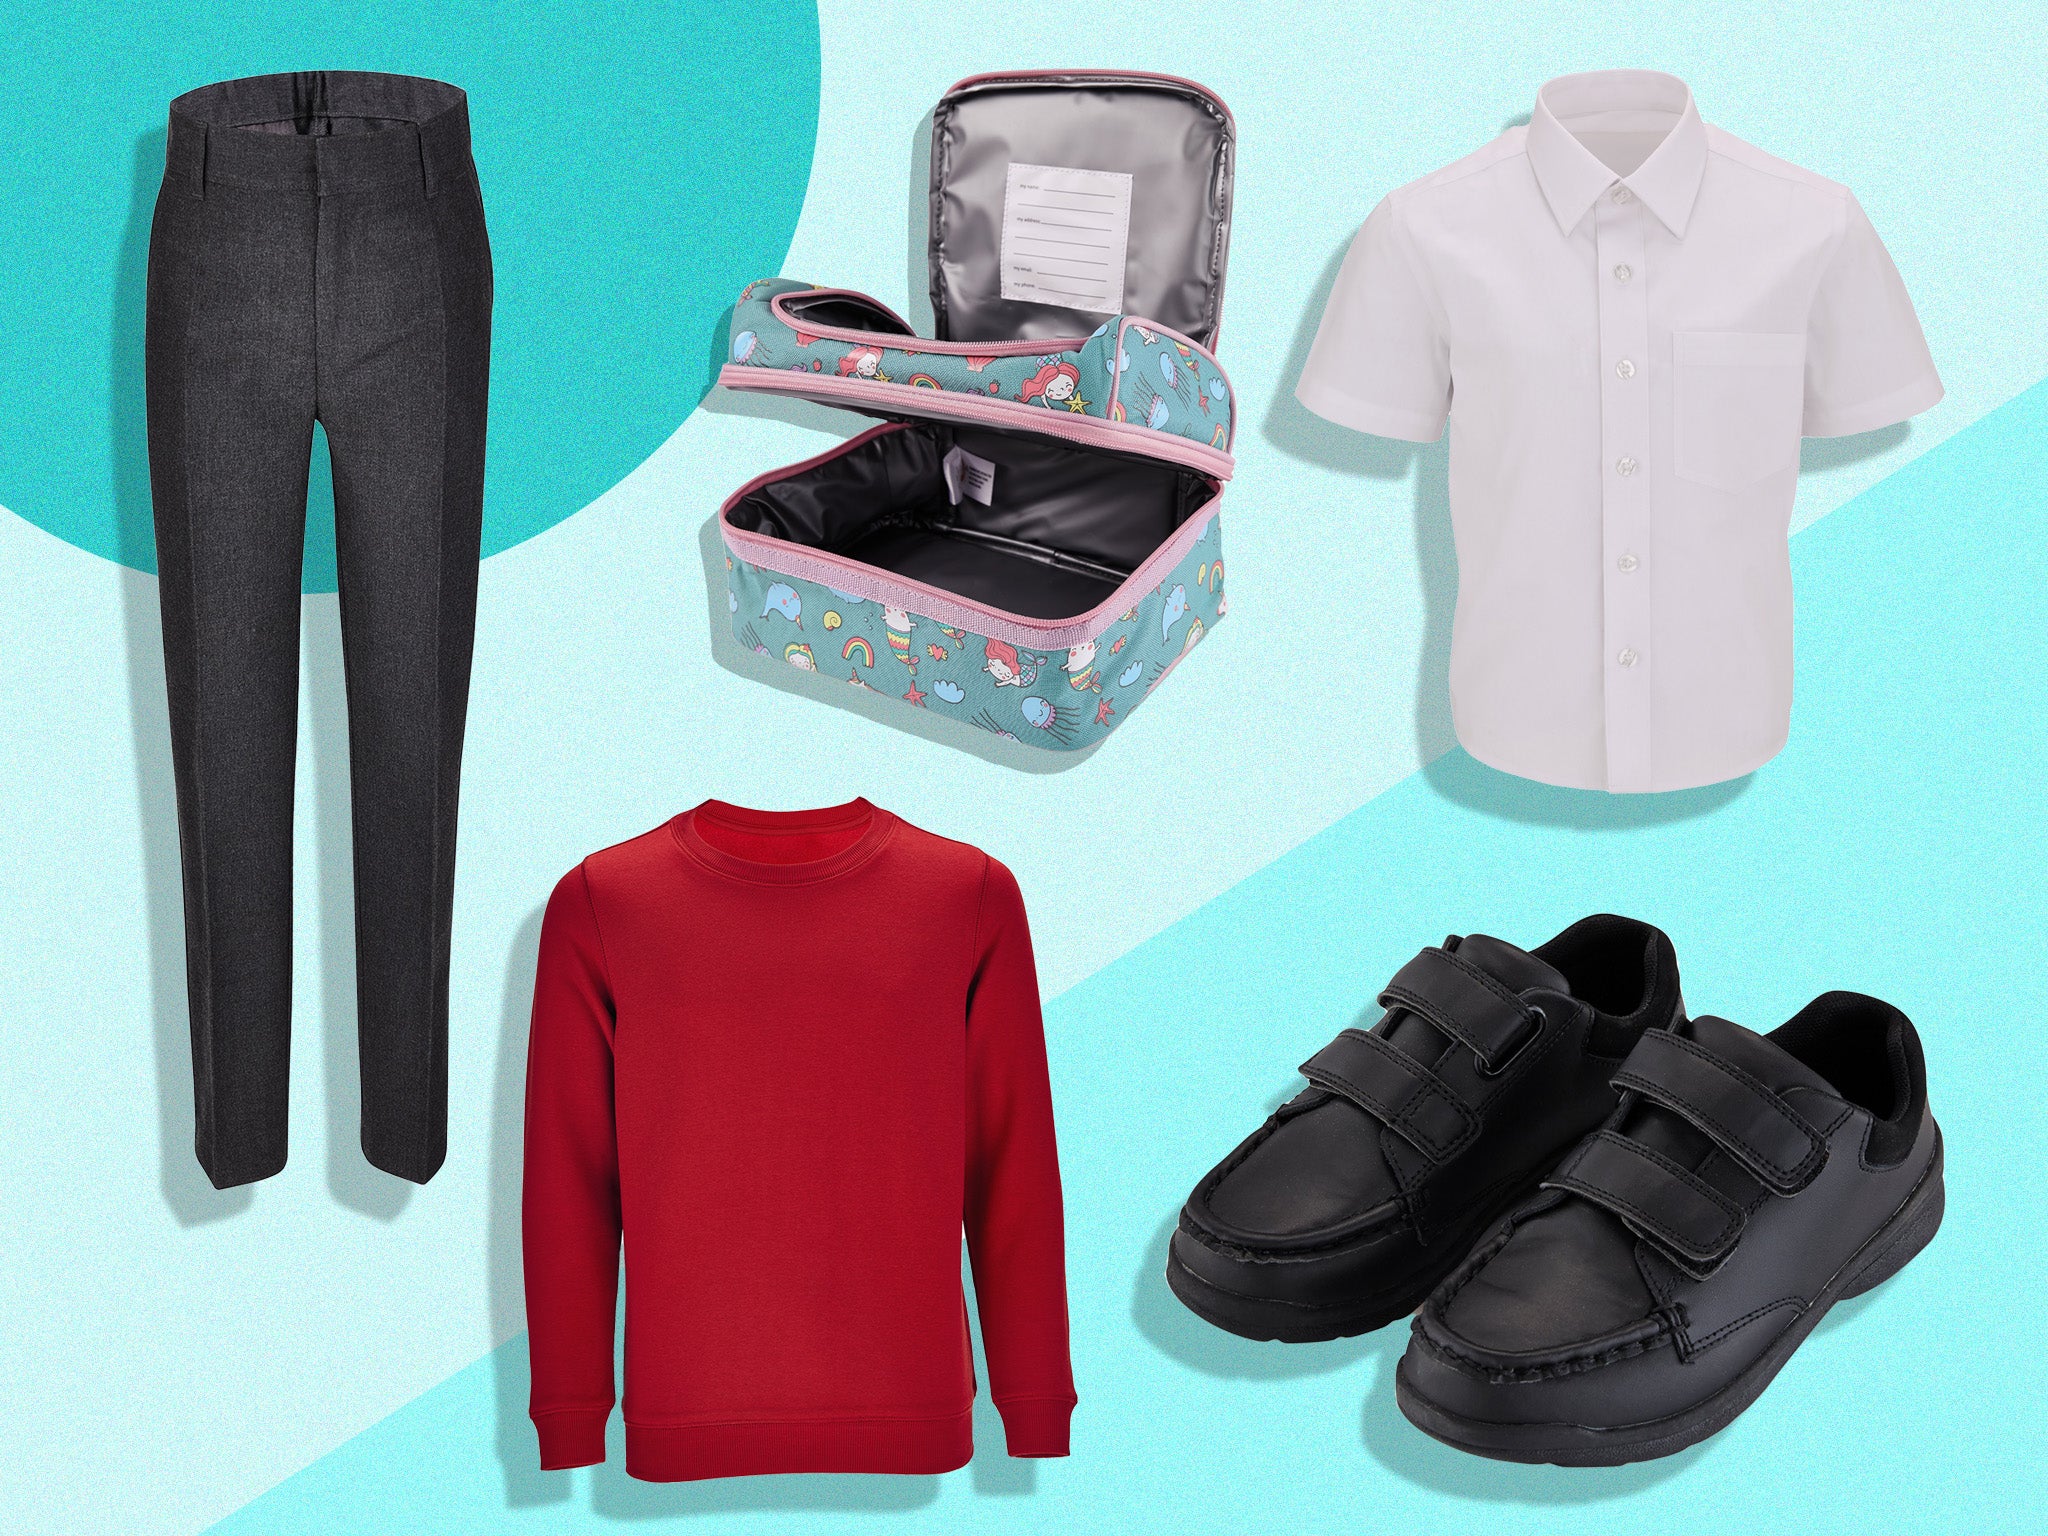 Tesco has Back to School covered with uniform essentials that are